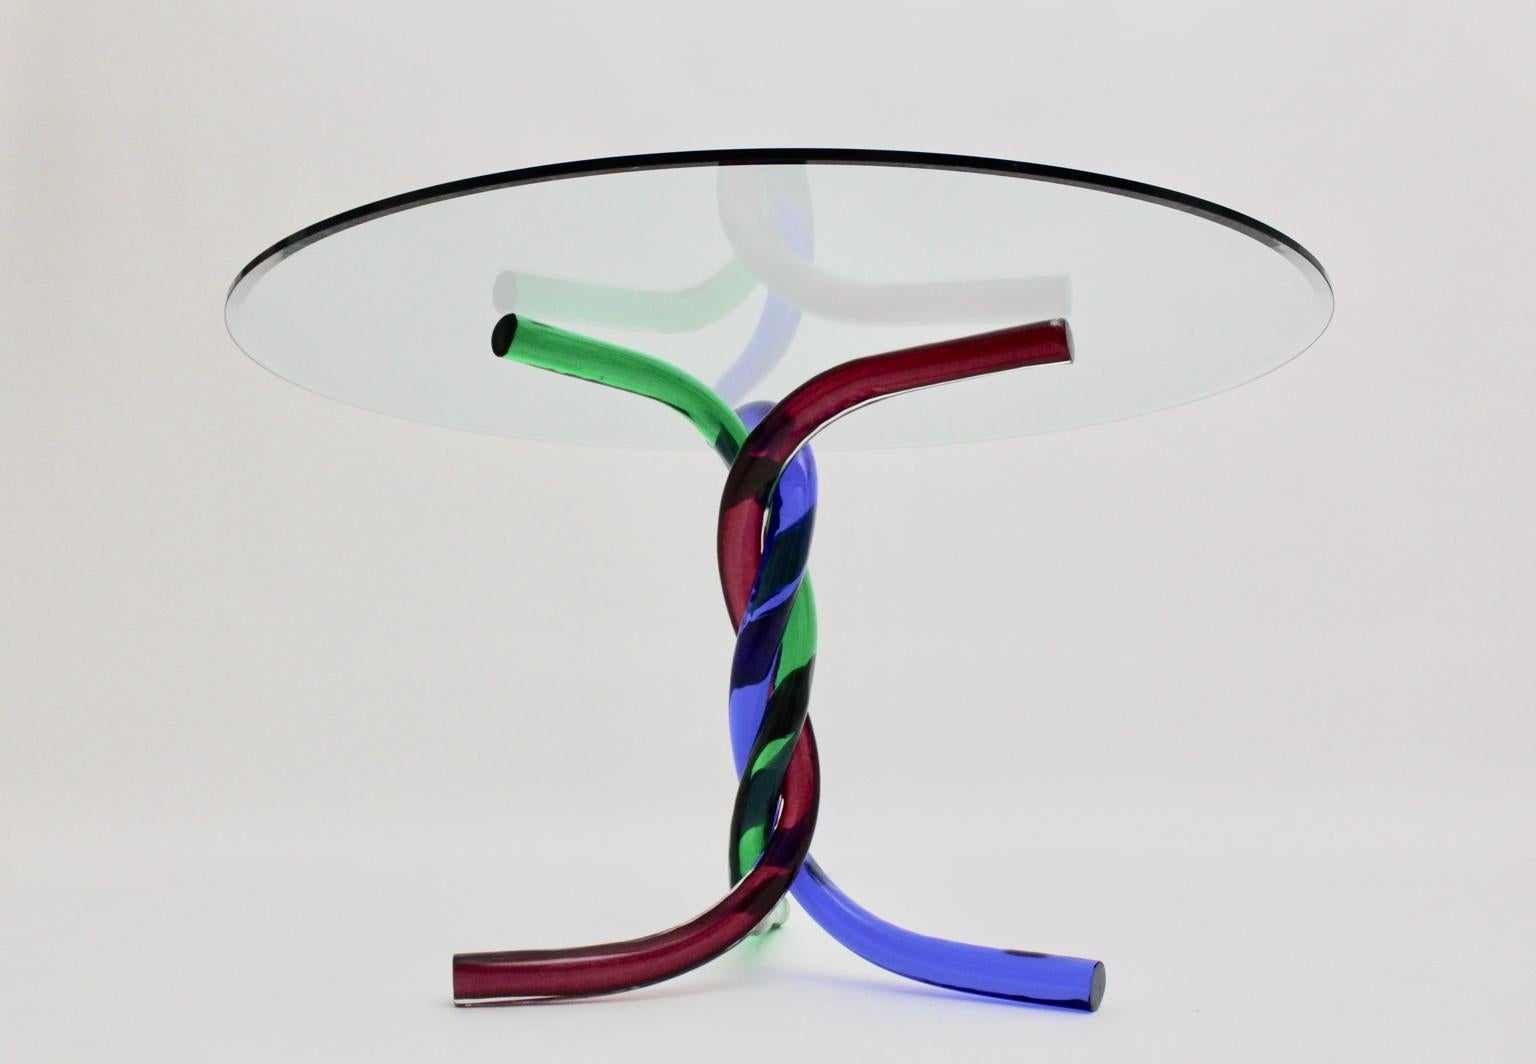 Mid Century Modern vintage glass dining table or center table, which was designed and manufactured in Murano,  Italy 1970. The rare dining table features a colorful base of three curved glass elements in the colors red, blue and green with a round